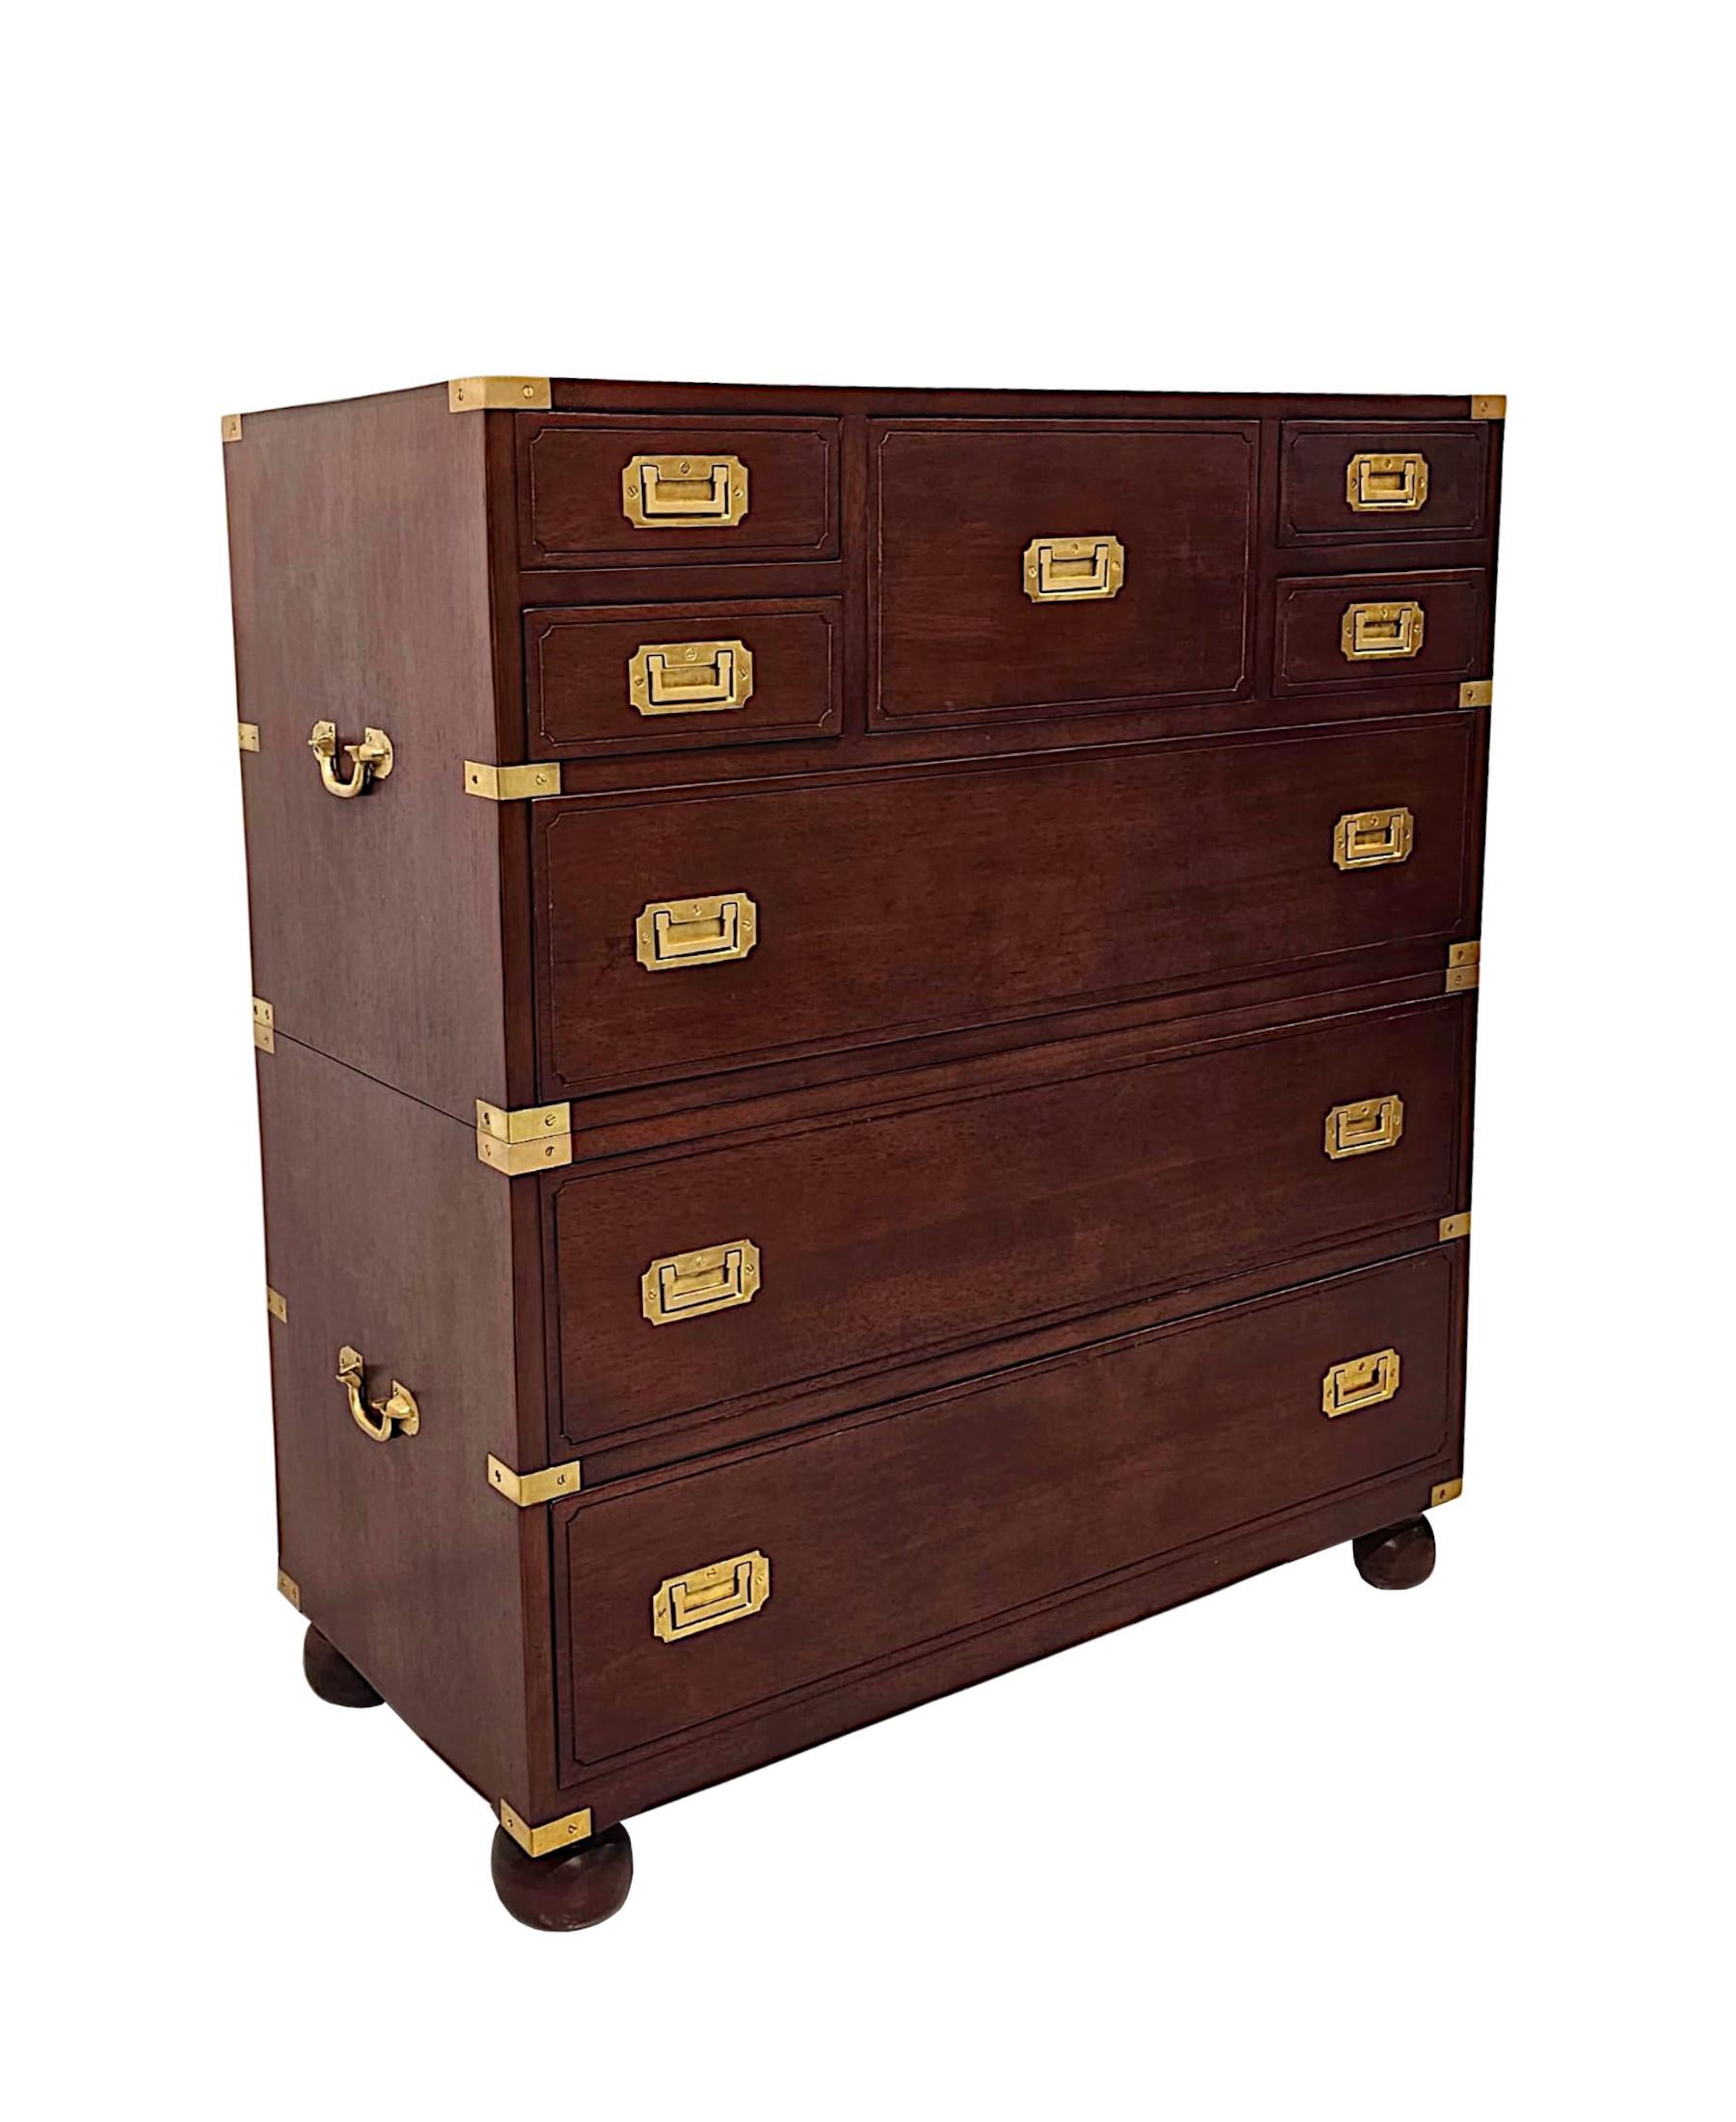 A fabulous cherrywood chest of drawers in the campaign style, of exceptional quality, finely hand carved, brass mounted throughout and with gorgeously rich patination and grain.  The well figured moulded top of rectangular form is framed with